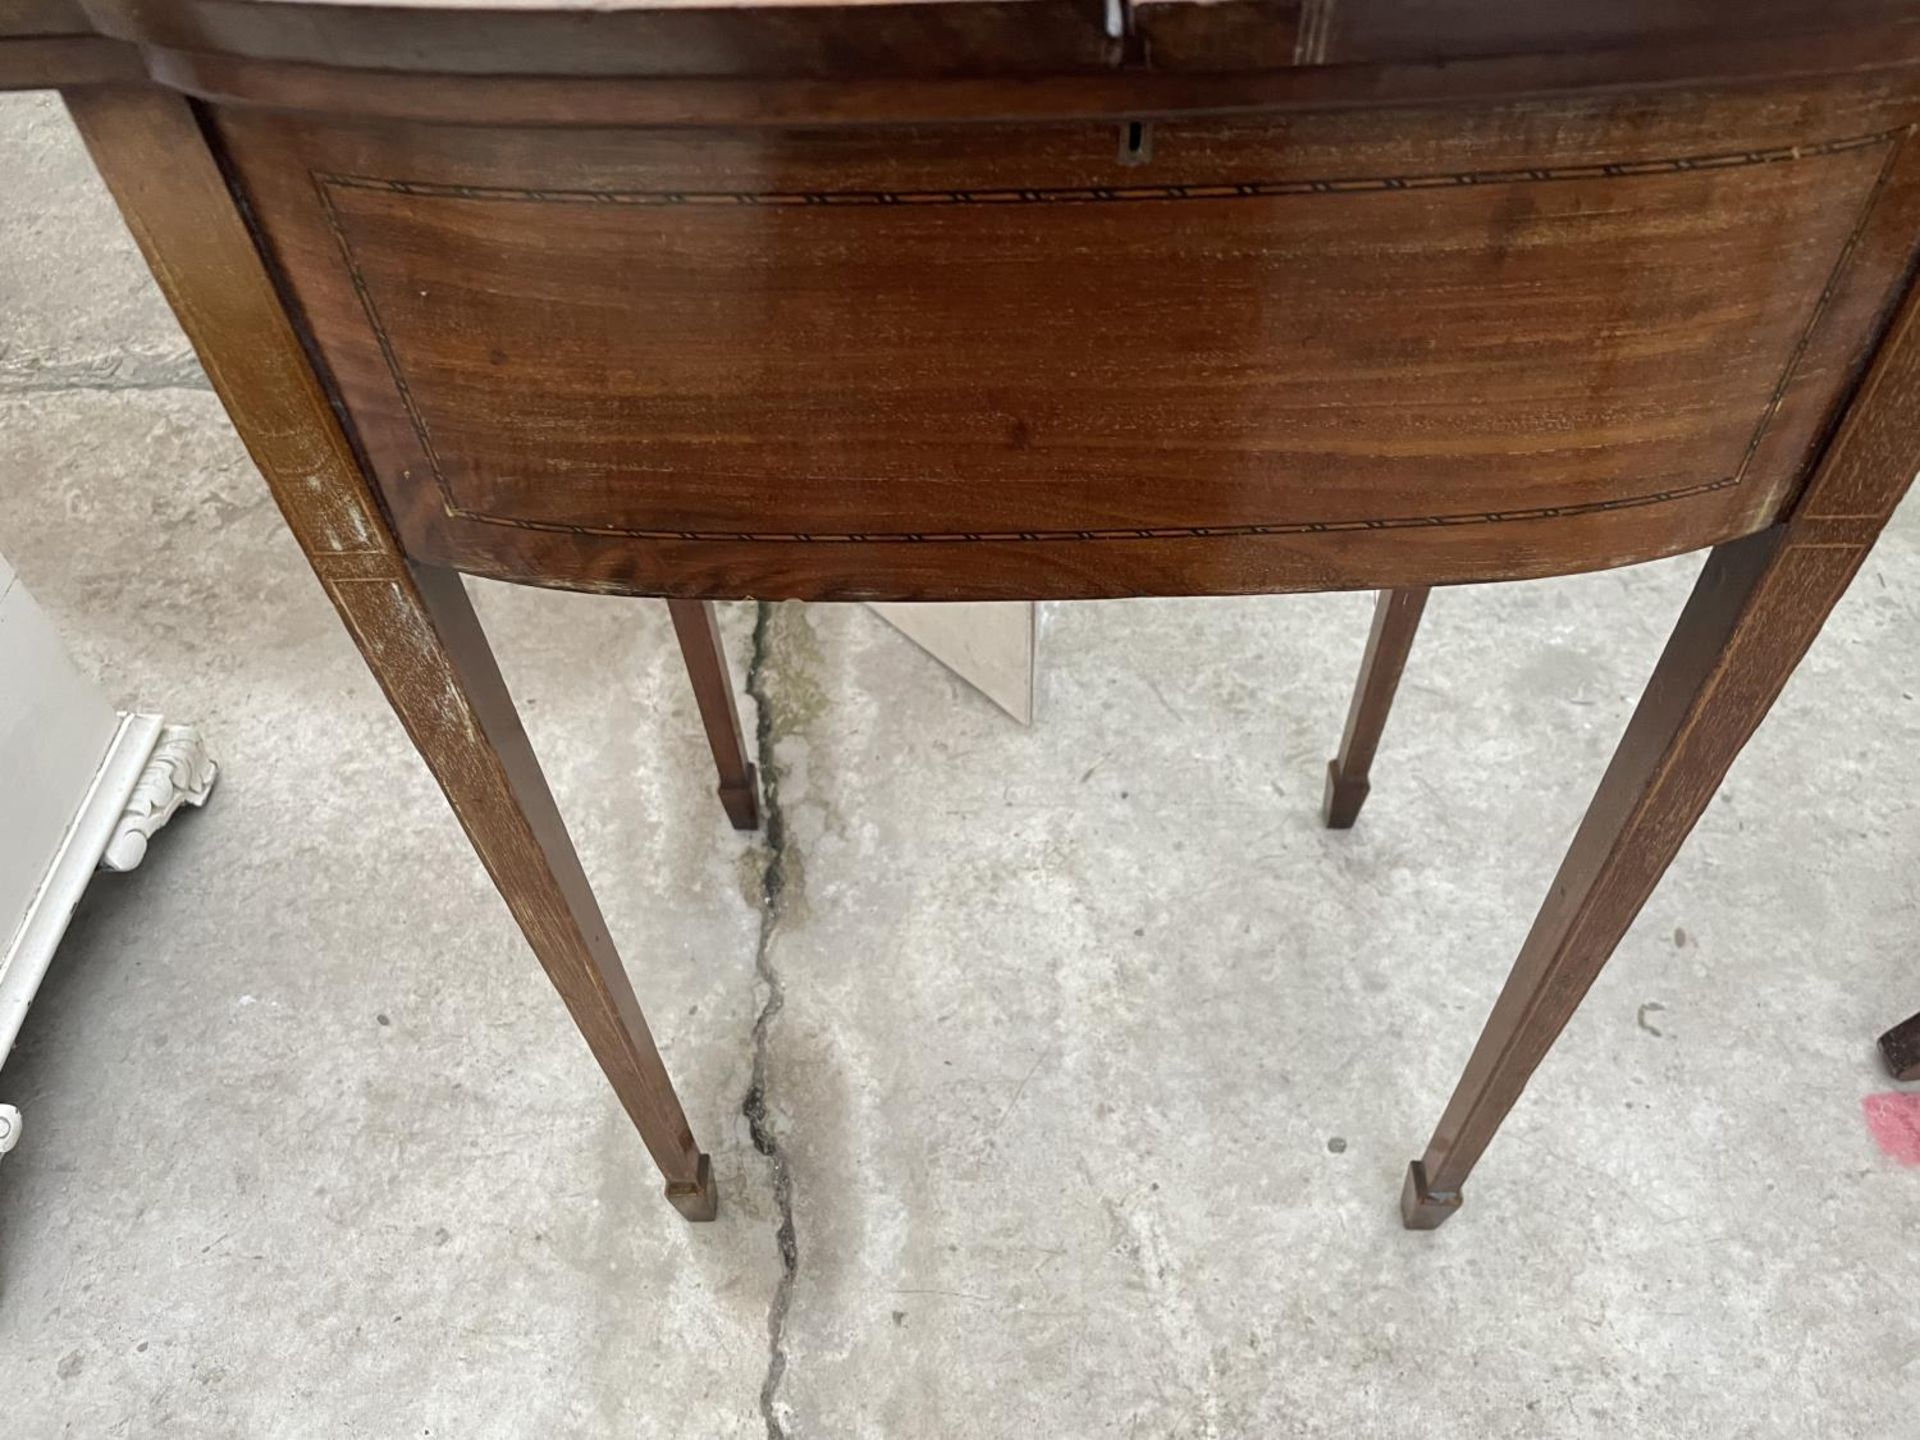 AN EDWARDIAN MAHOGANY AND INLAID SEWING BOX/TABLE WITH FOLD-OVER TOP, ON TAPERED LEGS WITH SPADE - Image 3 of 4